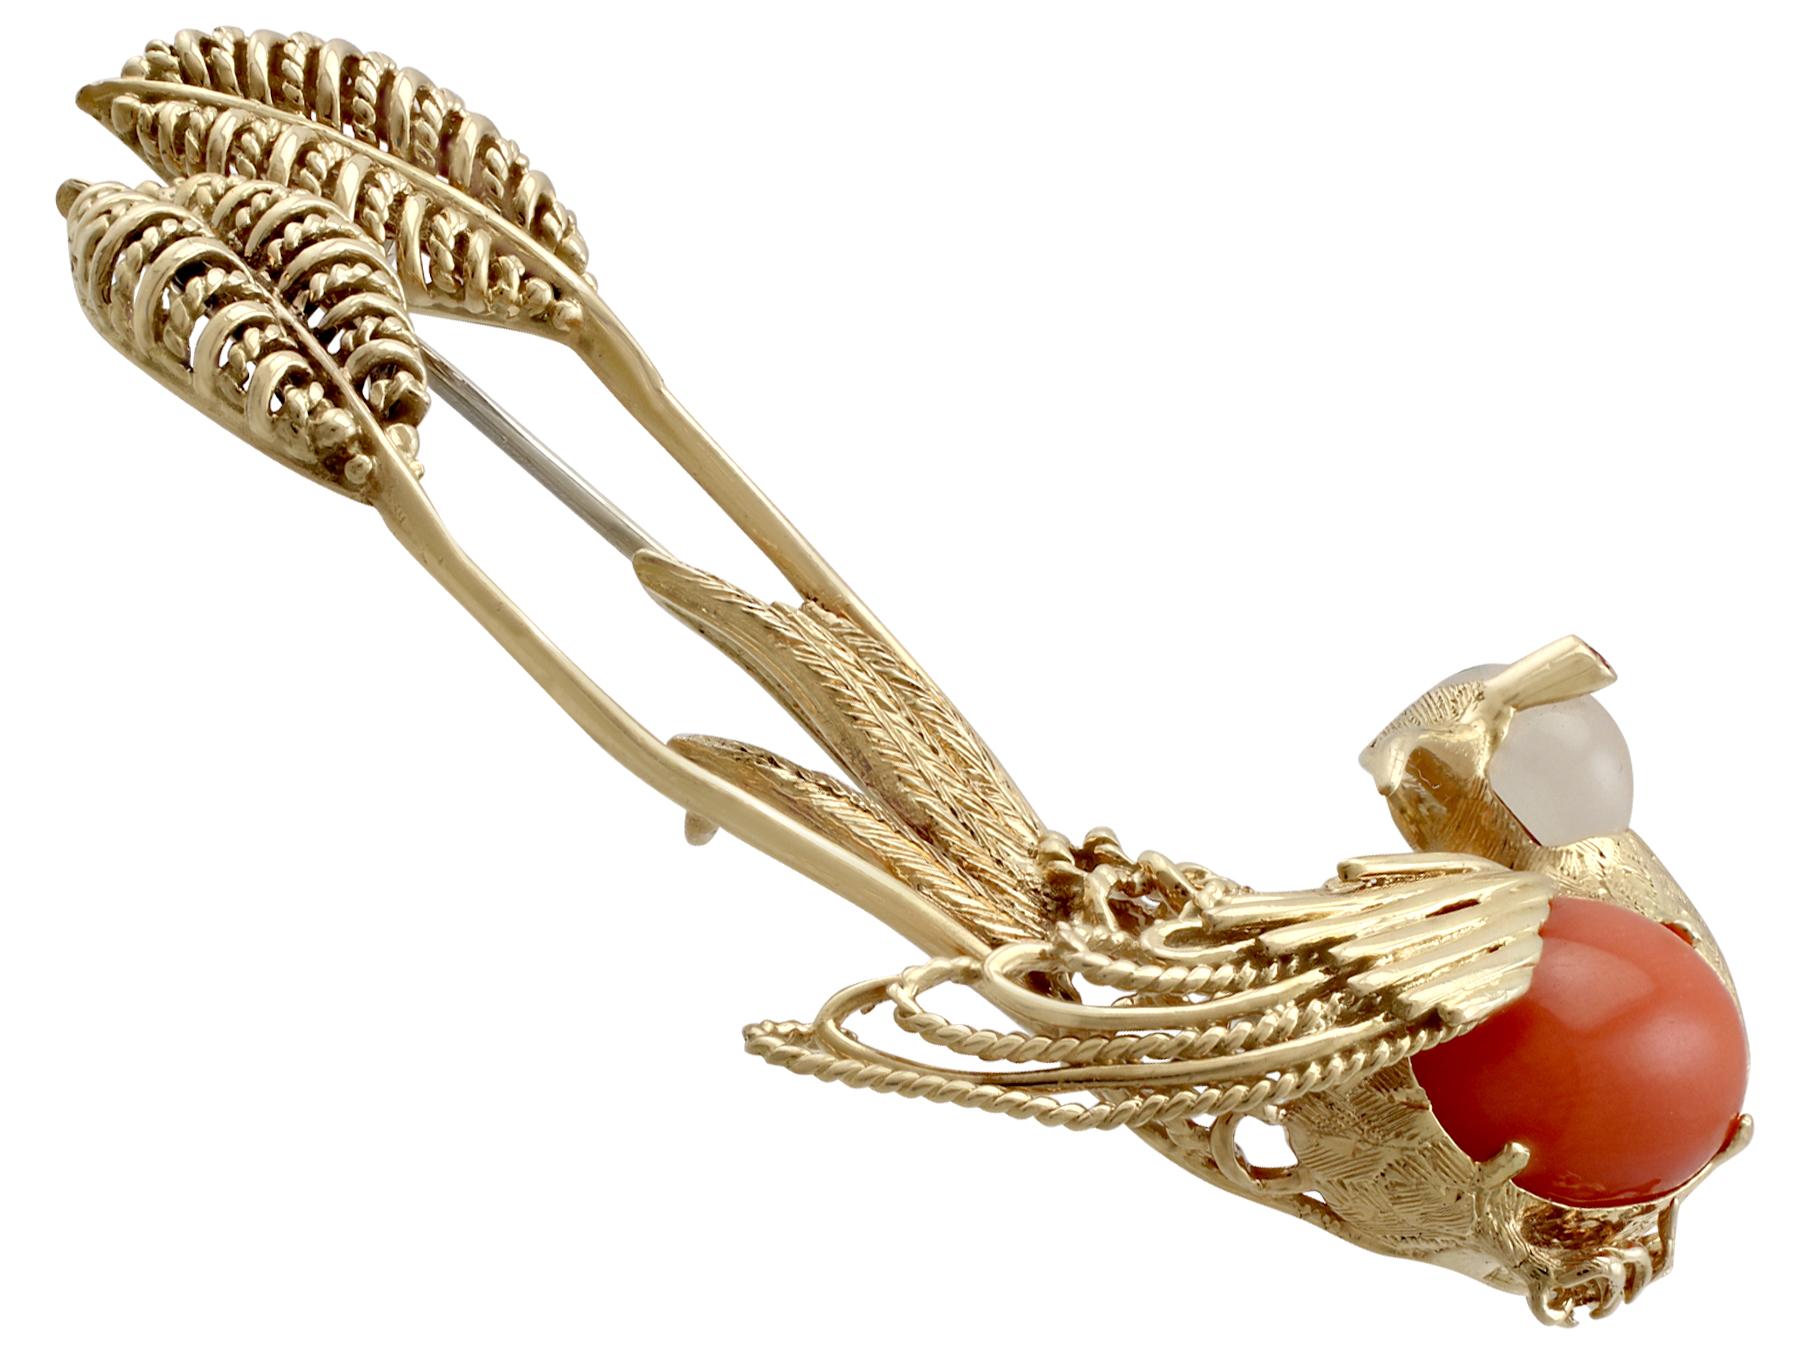 A stunning 0.03 carat ruby, 1.64 carat moonstone, coral and 18 karat yellow gold 'hummingbird' brooch; part of our diverse vintage jewelry collections.

This stunning, fine and impressive vintage bird brooch has been crafted in 18k yellow gold.

The